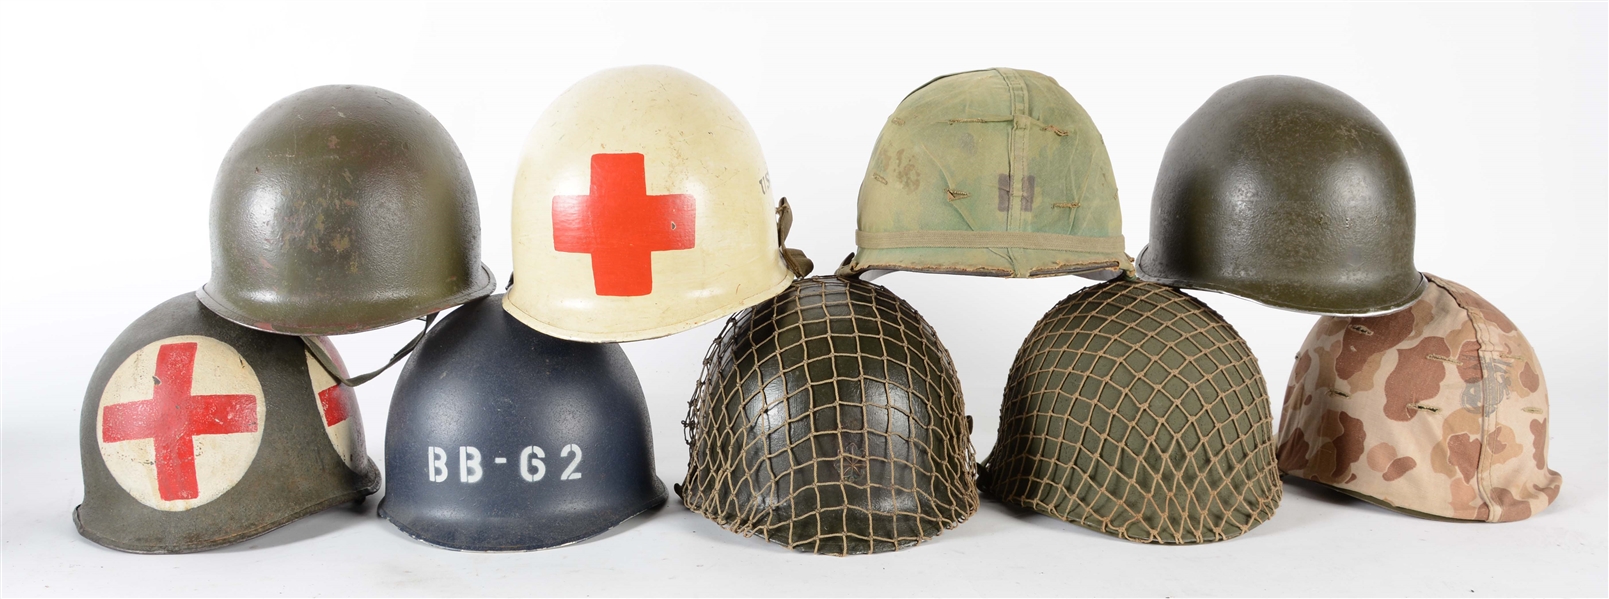 LARGE LOT OF U.S. M1 HELMETS OF VARIOUS AGES.